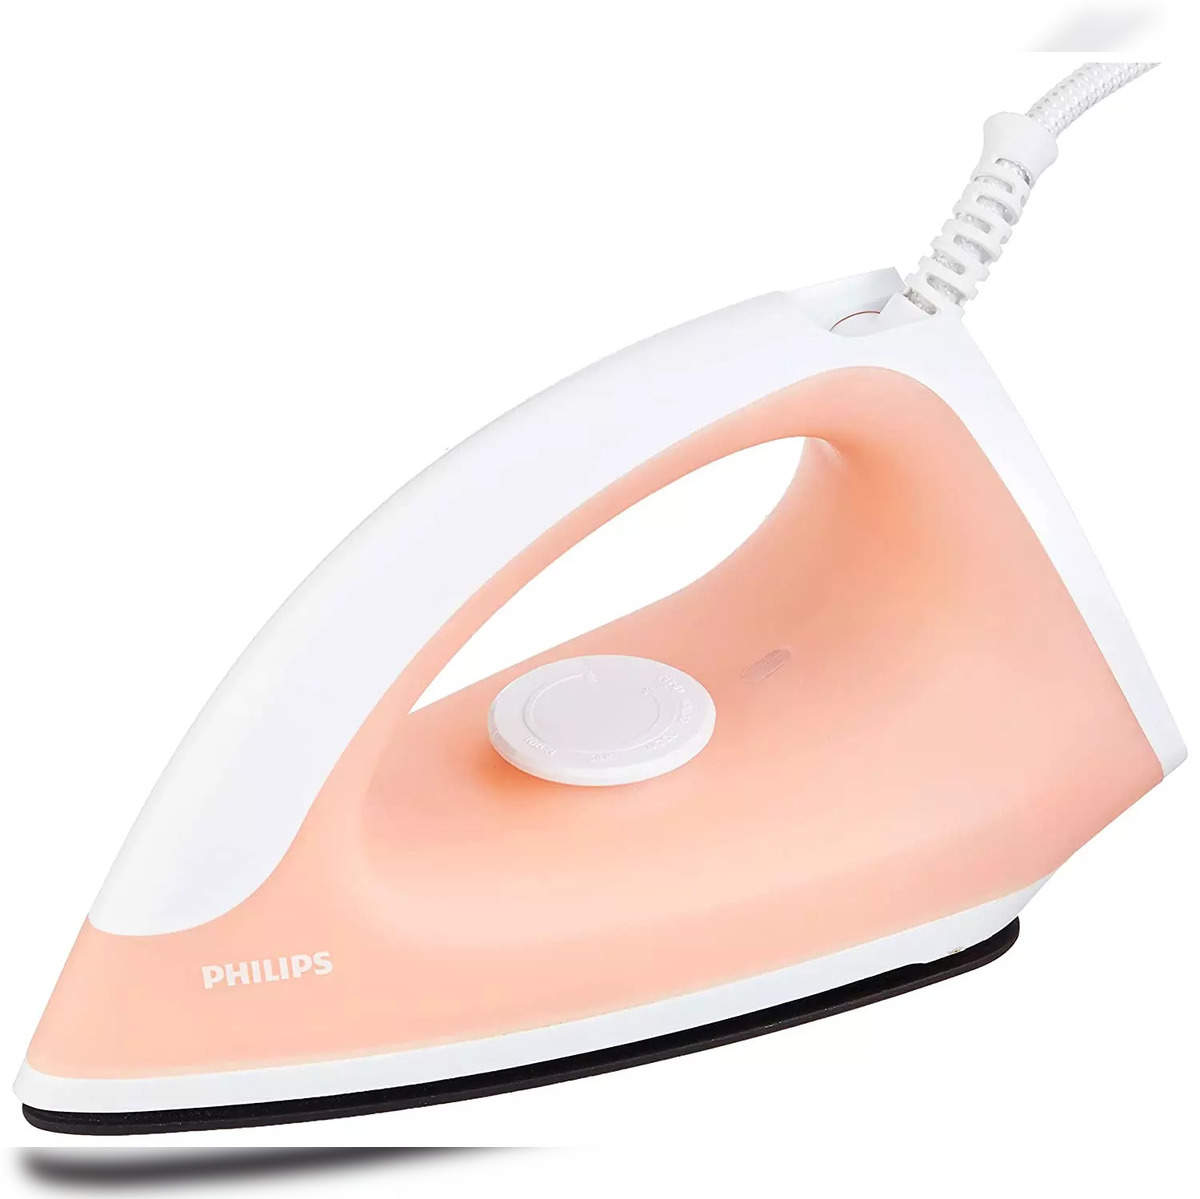 4 Benefits to Ironing Clothes